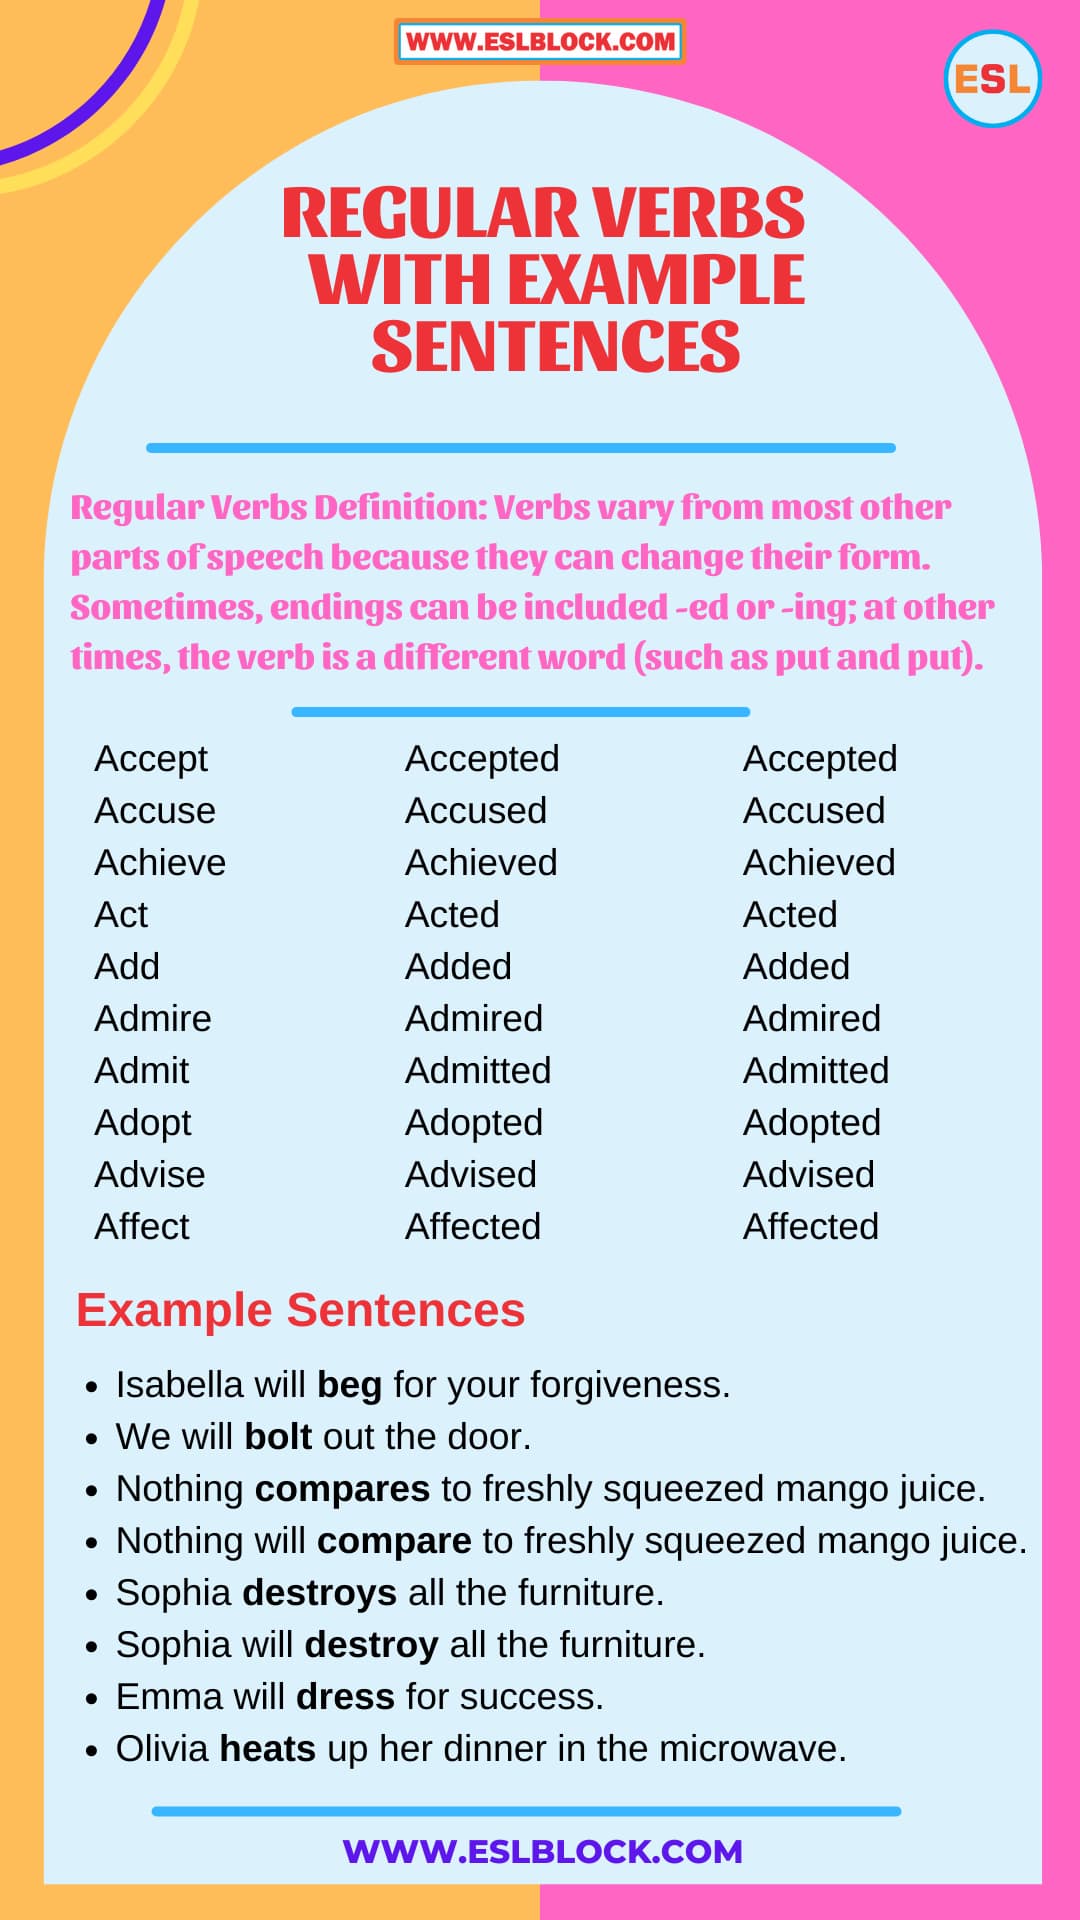 100 Example Sentences Using Regular Verbs, All Regular Verbs, List of Regular Verbs, Regular Verbs, Regular verbs list, Regular Verbs Vocabulary, Regular Verbs with Example Sentences, Types of Verbs, Types of Verbs with Example Sentences, What are Regular Verbs, What are the types of Verbs, What are Verbs, What is a Verb